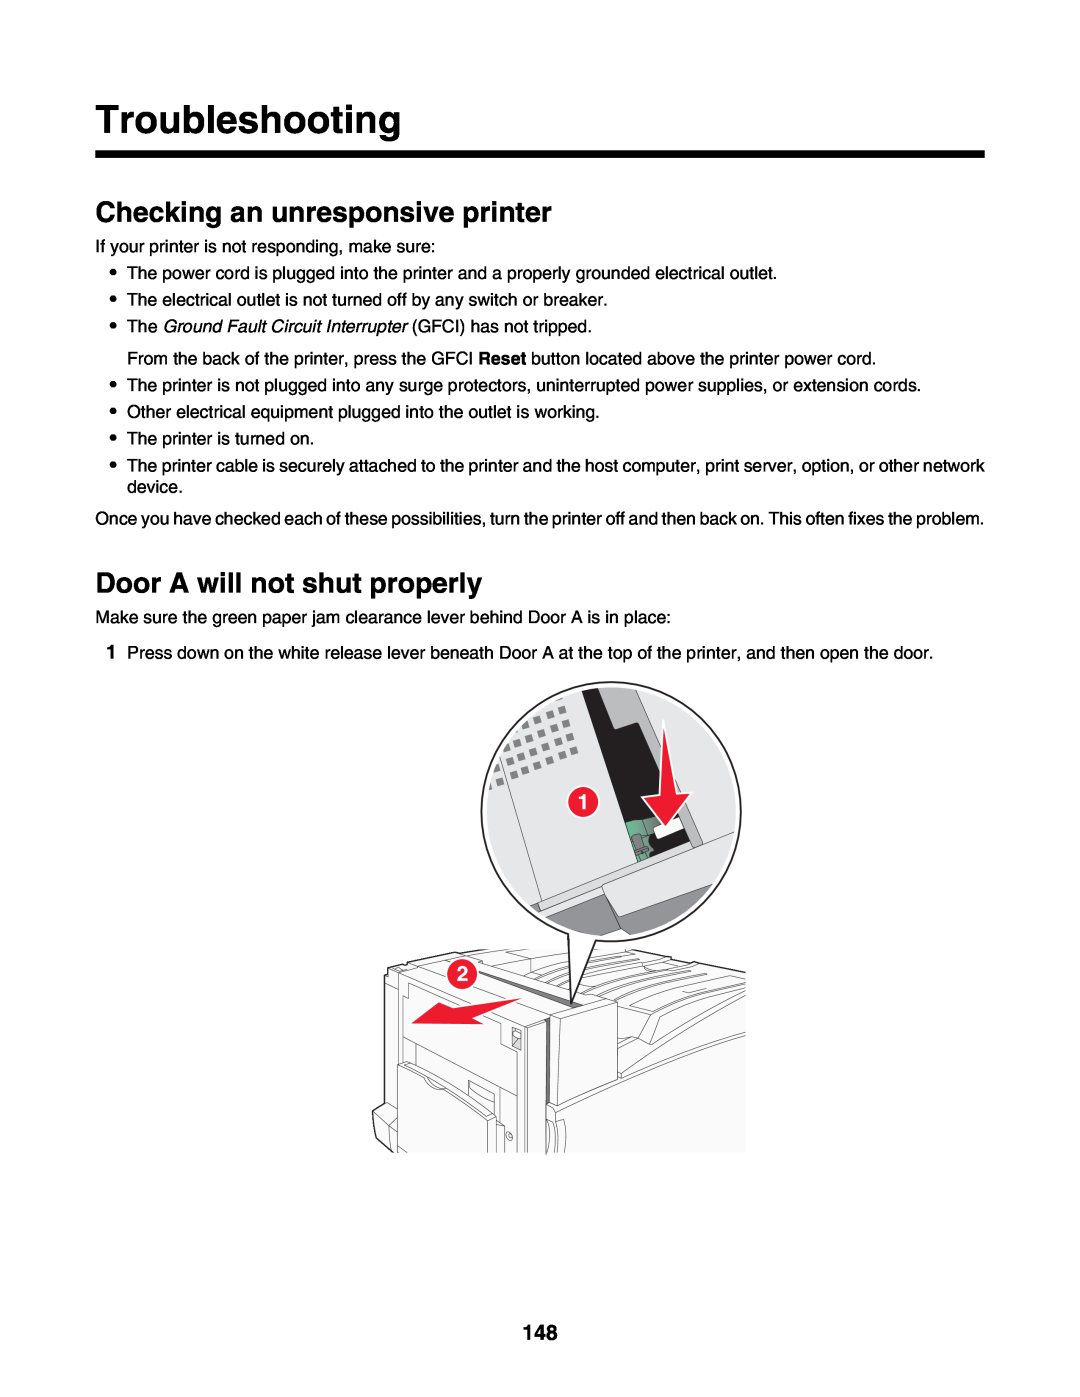 Lexmark C935 manual Troubleshooting, Checking an unresponsive printer, Door A will not shut properly 